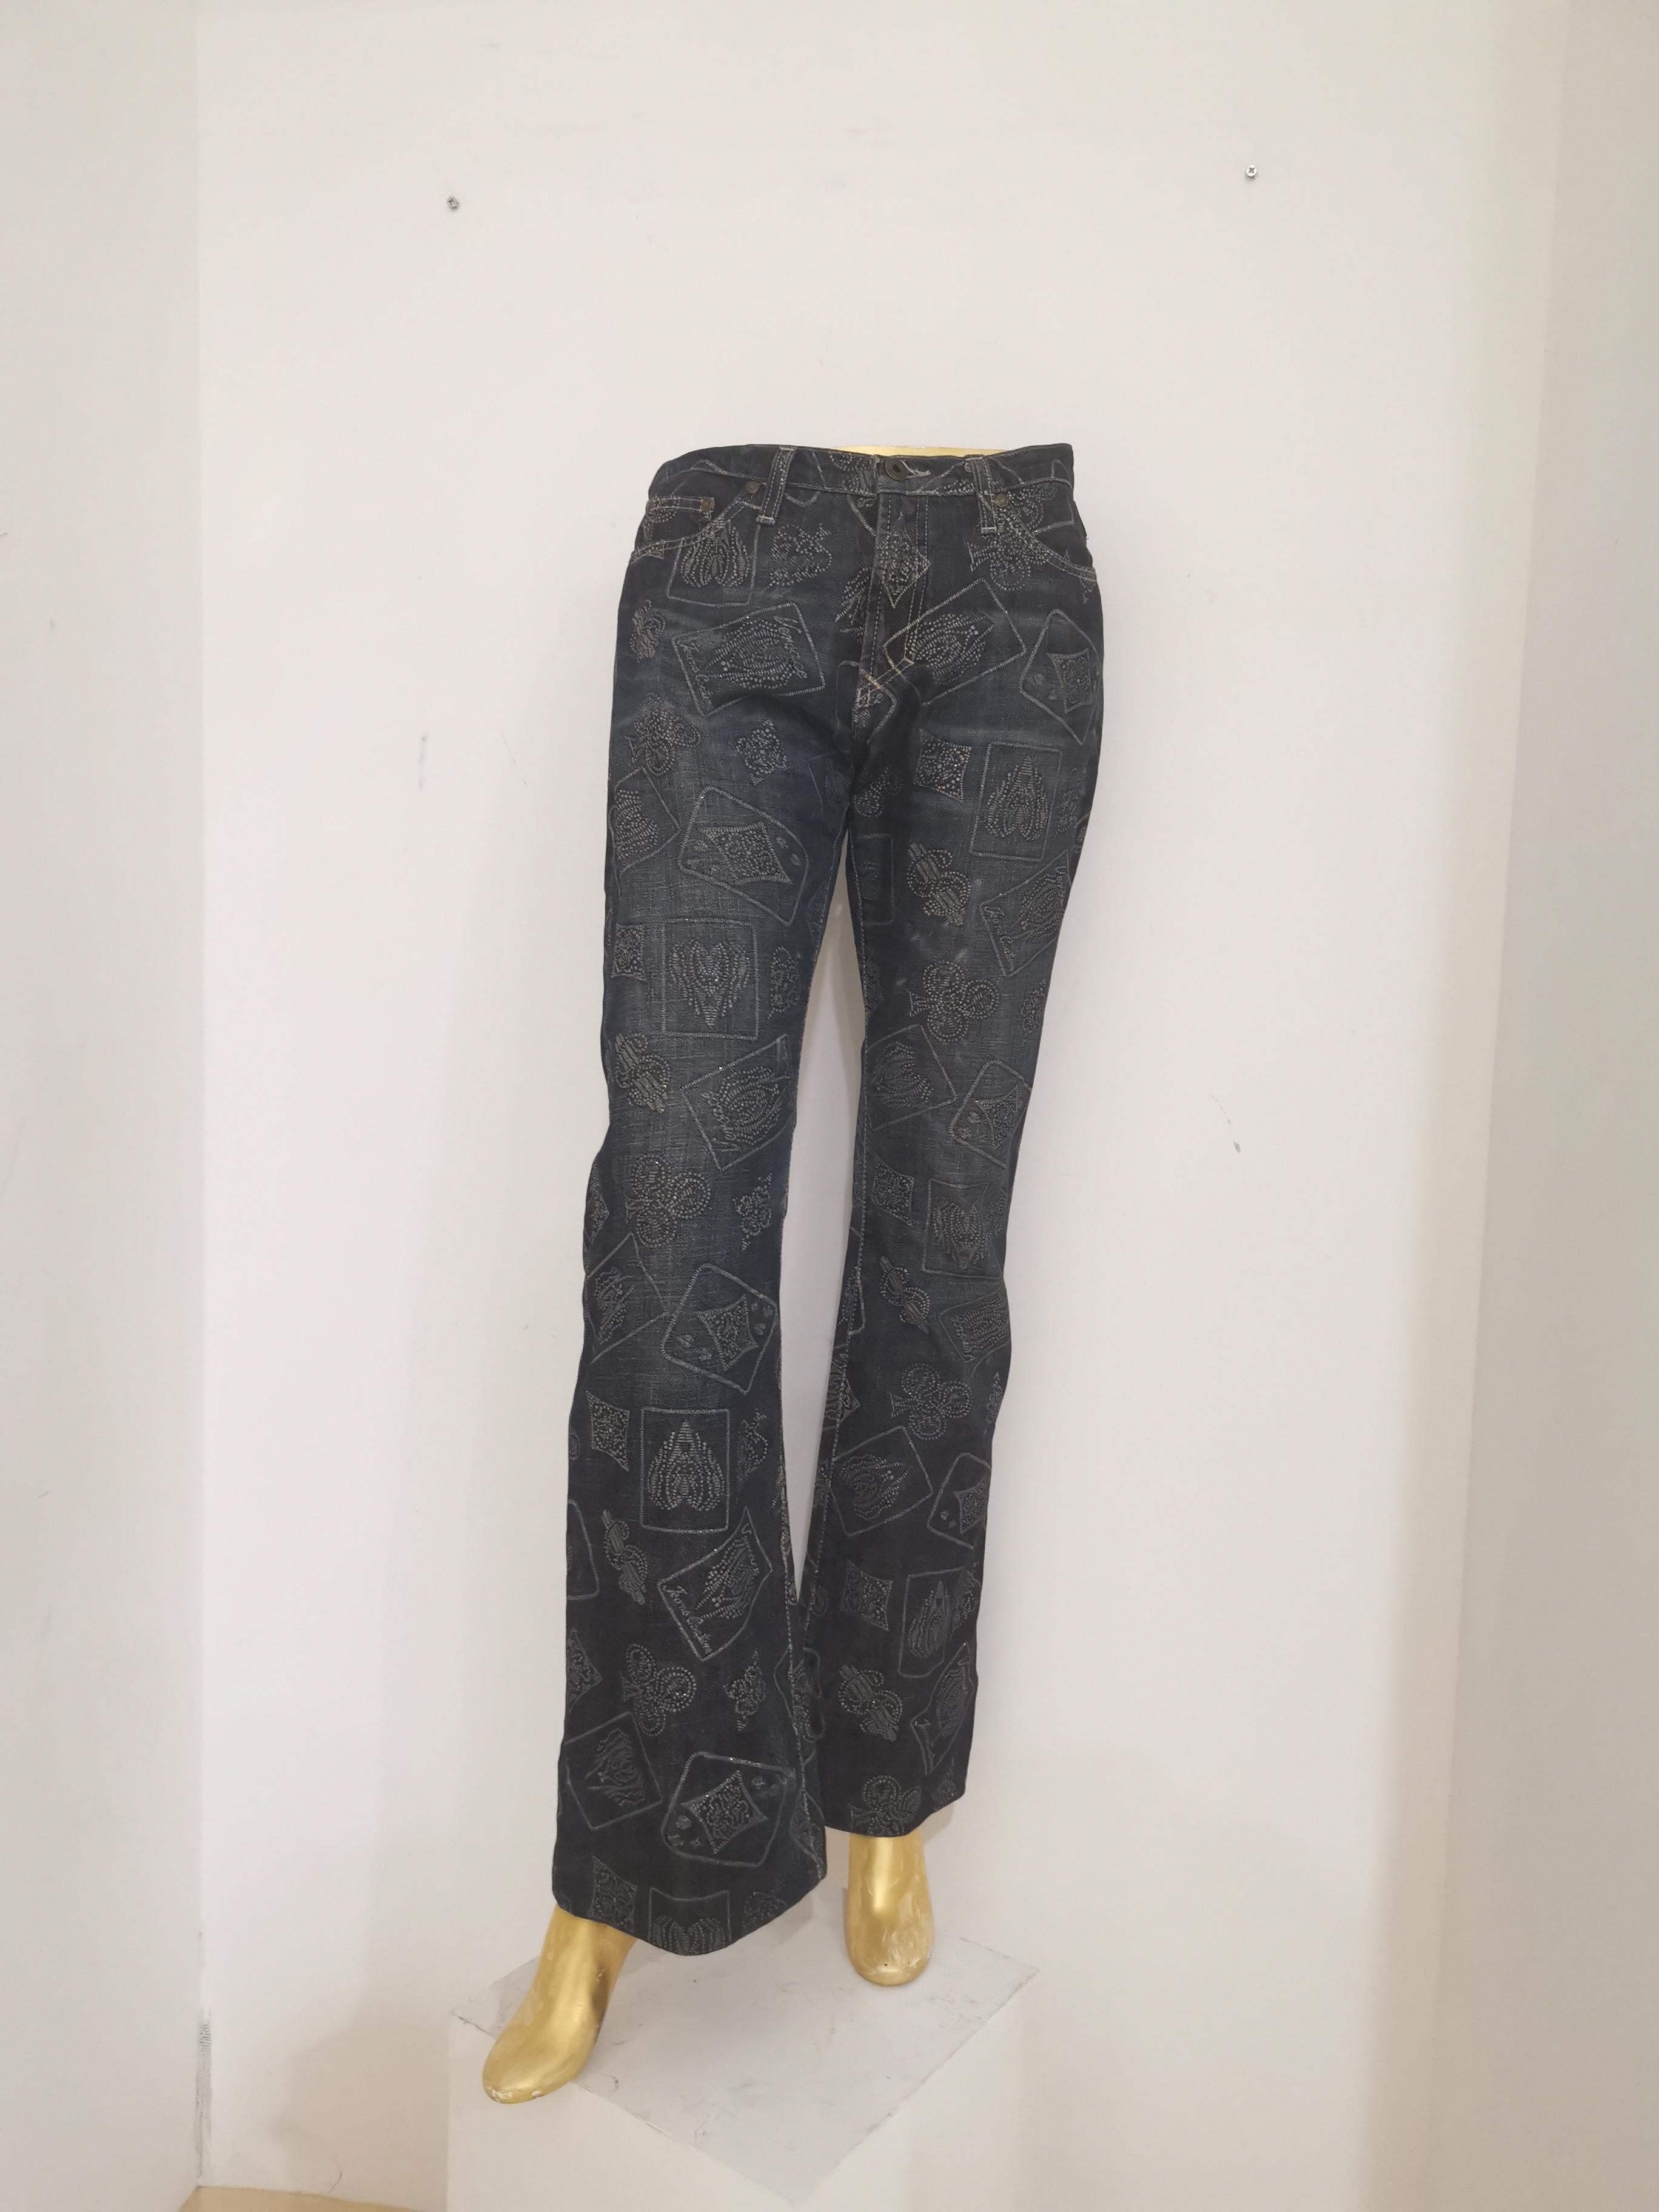 Versace jeans Couture denim jeans
totally made in italy in size 44